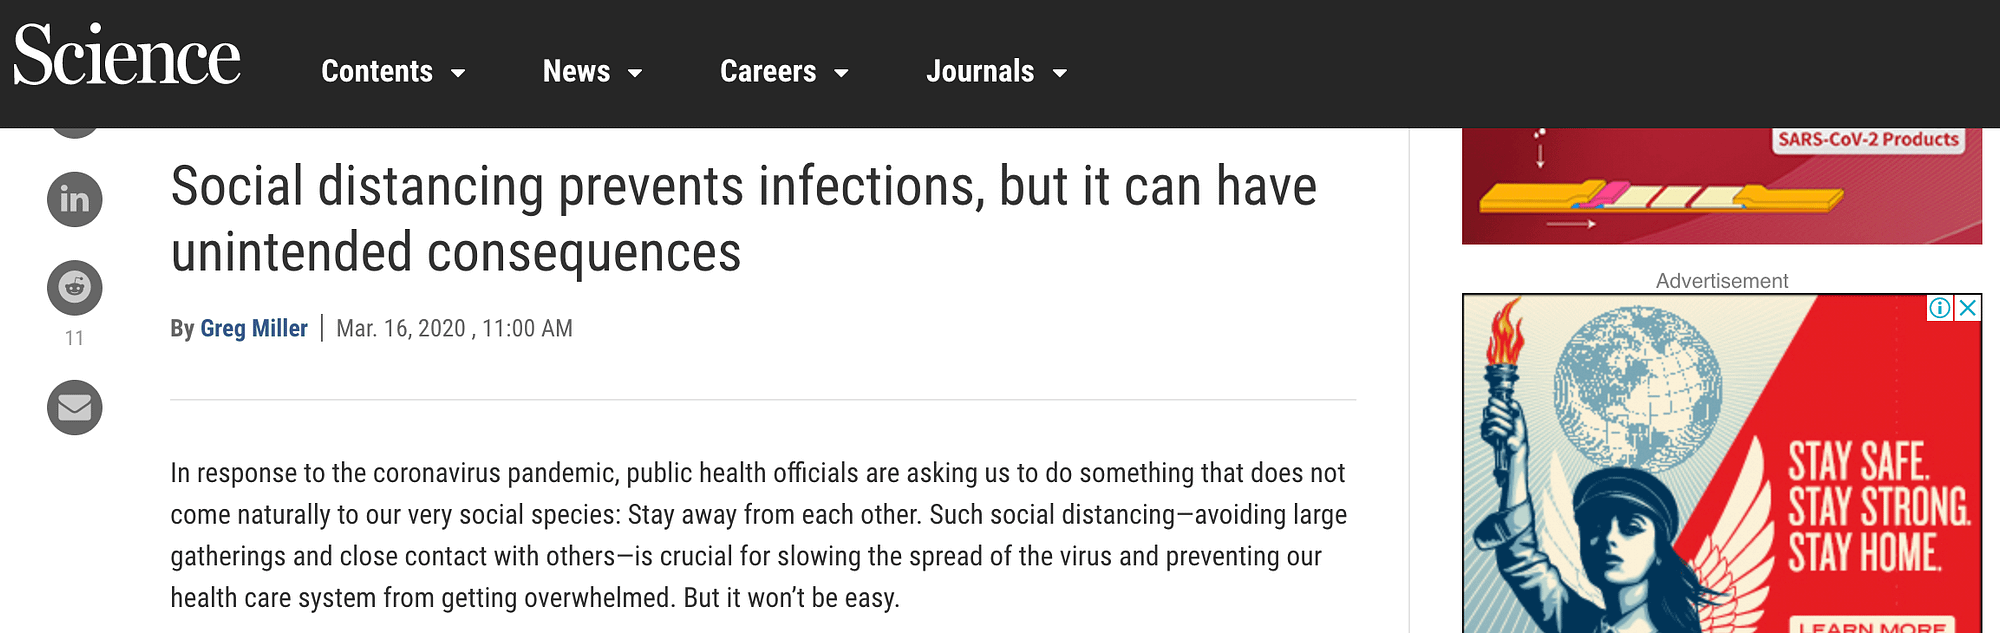 Science Magazine article - Social distancing prevents infections, but it can have unintended consequences